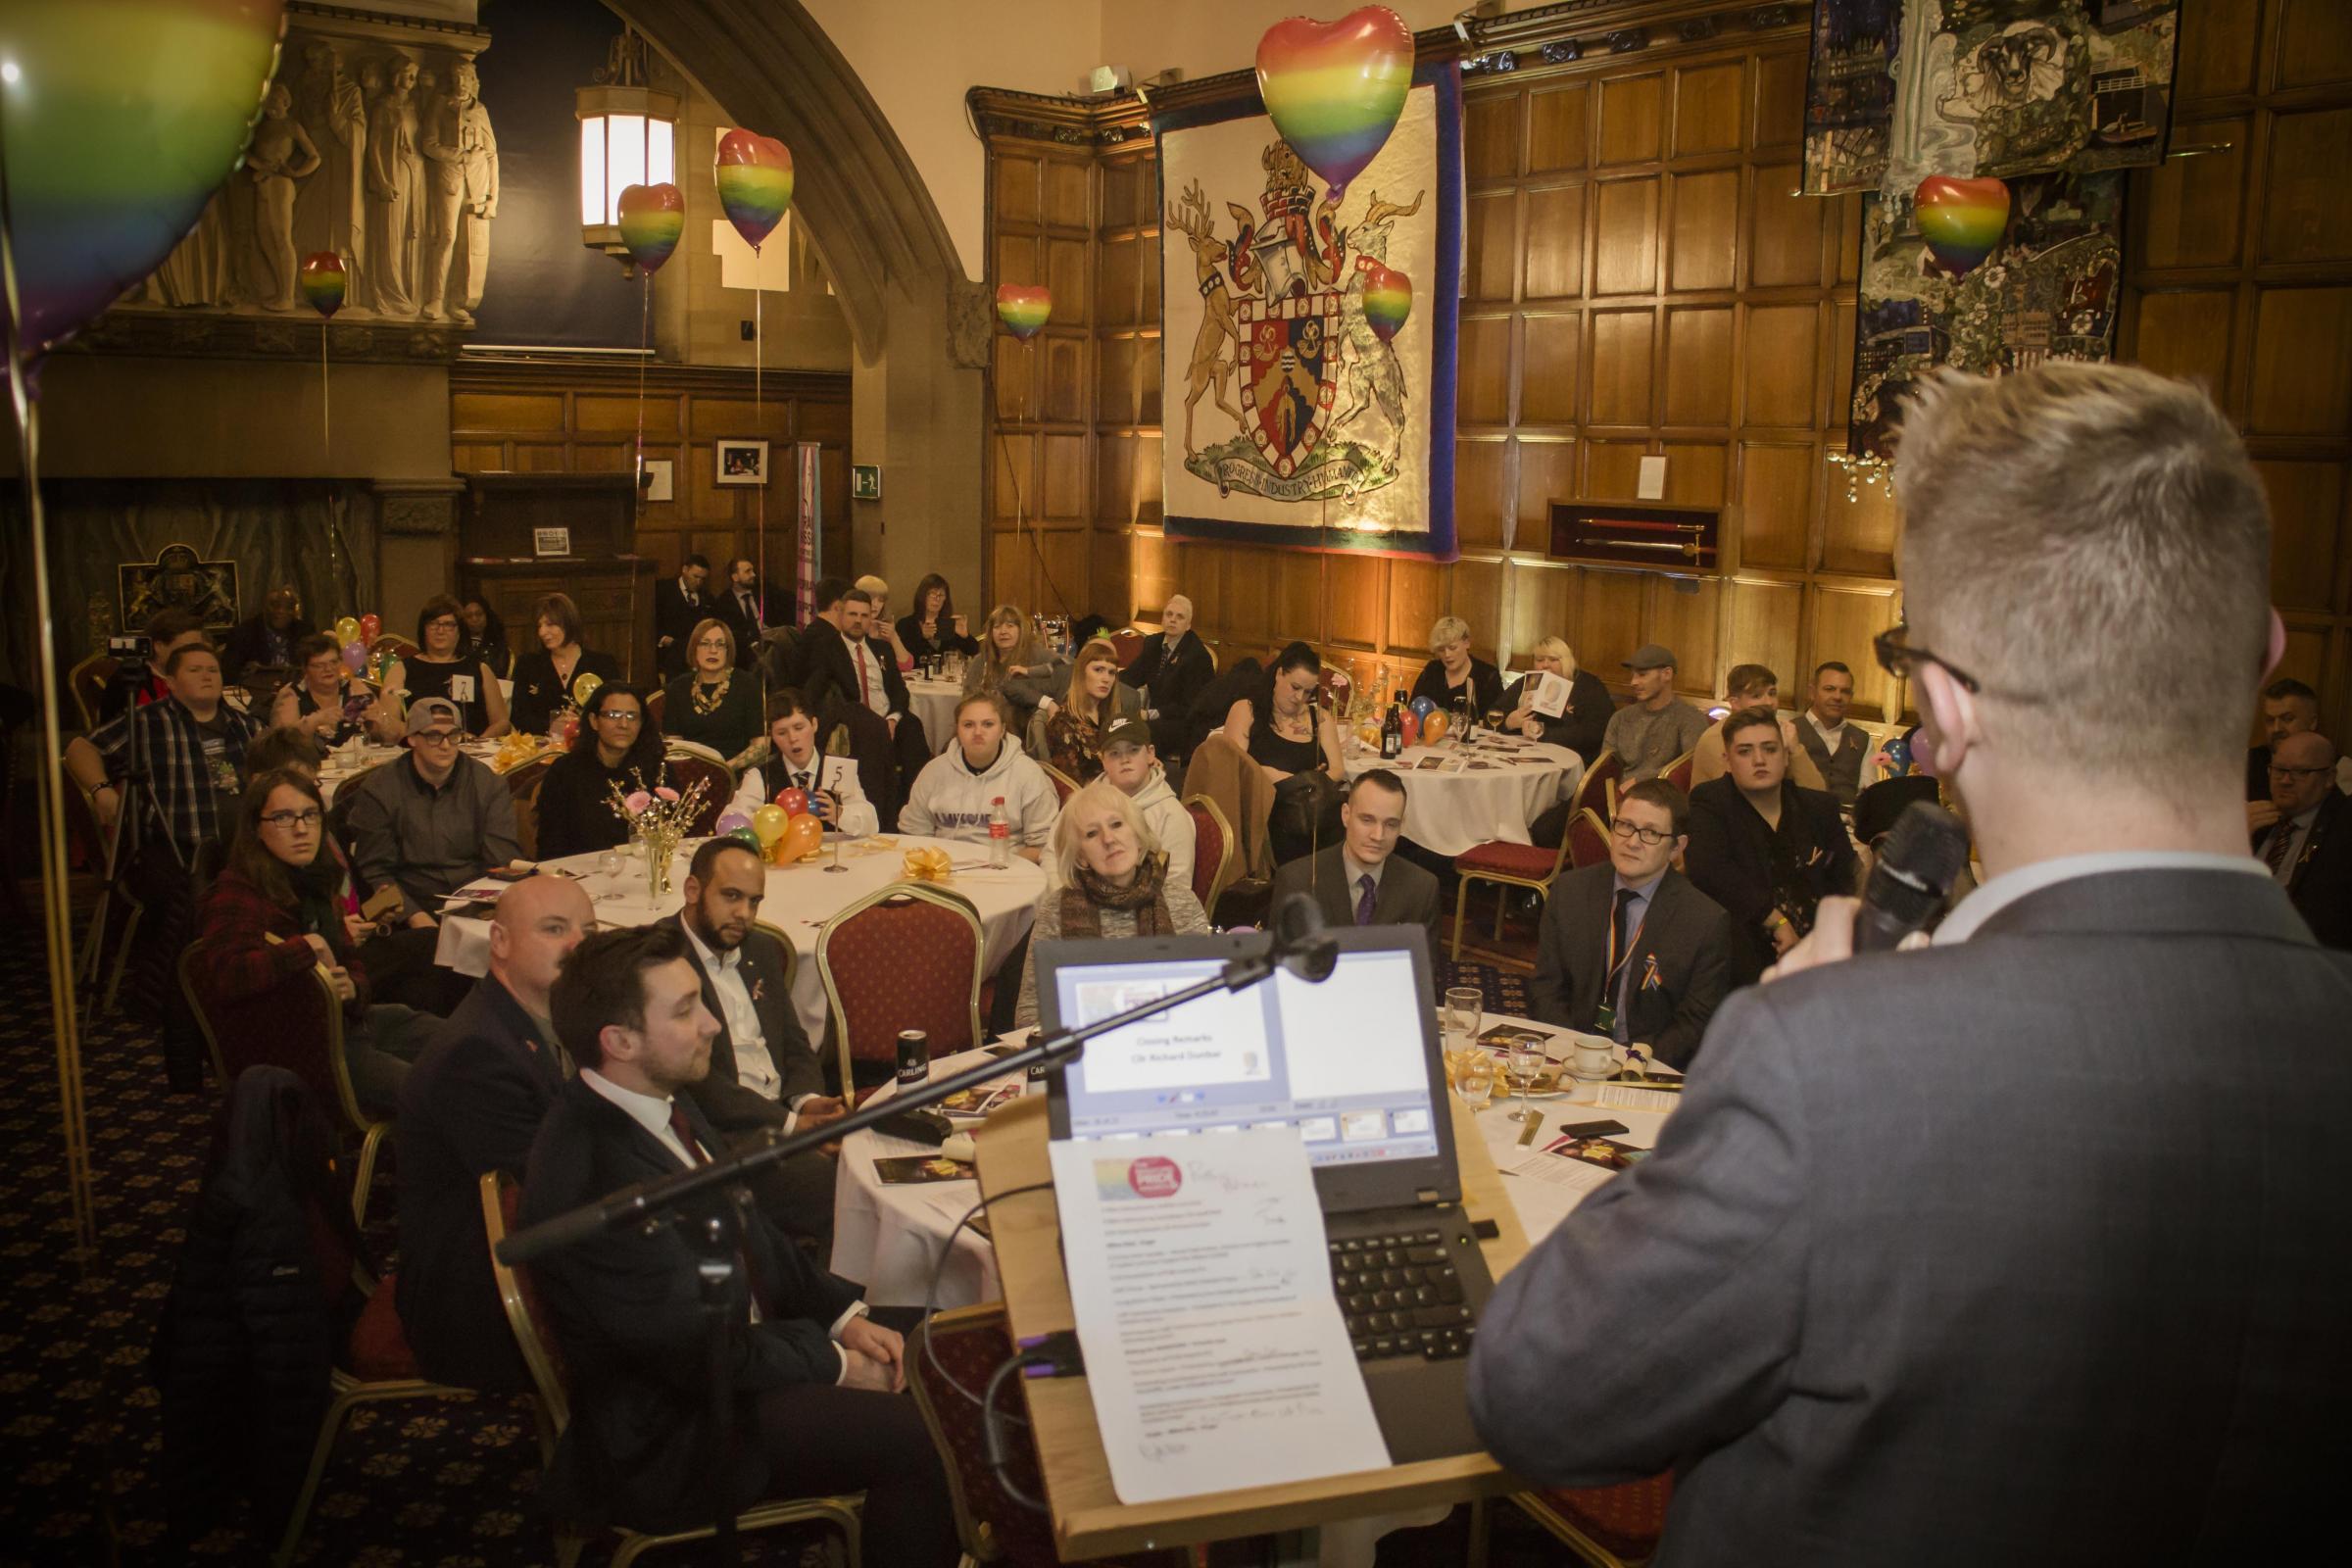 City Hall hosts inaugural Bradford Pride Awards to recognise those involved in the local LGBT community - Bradford Telegraph and Argus